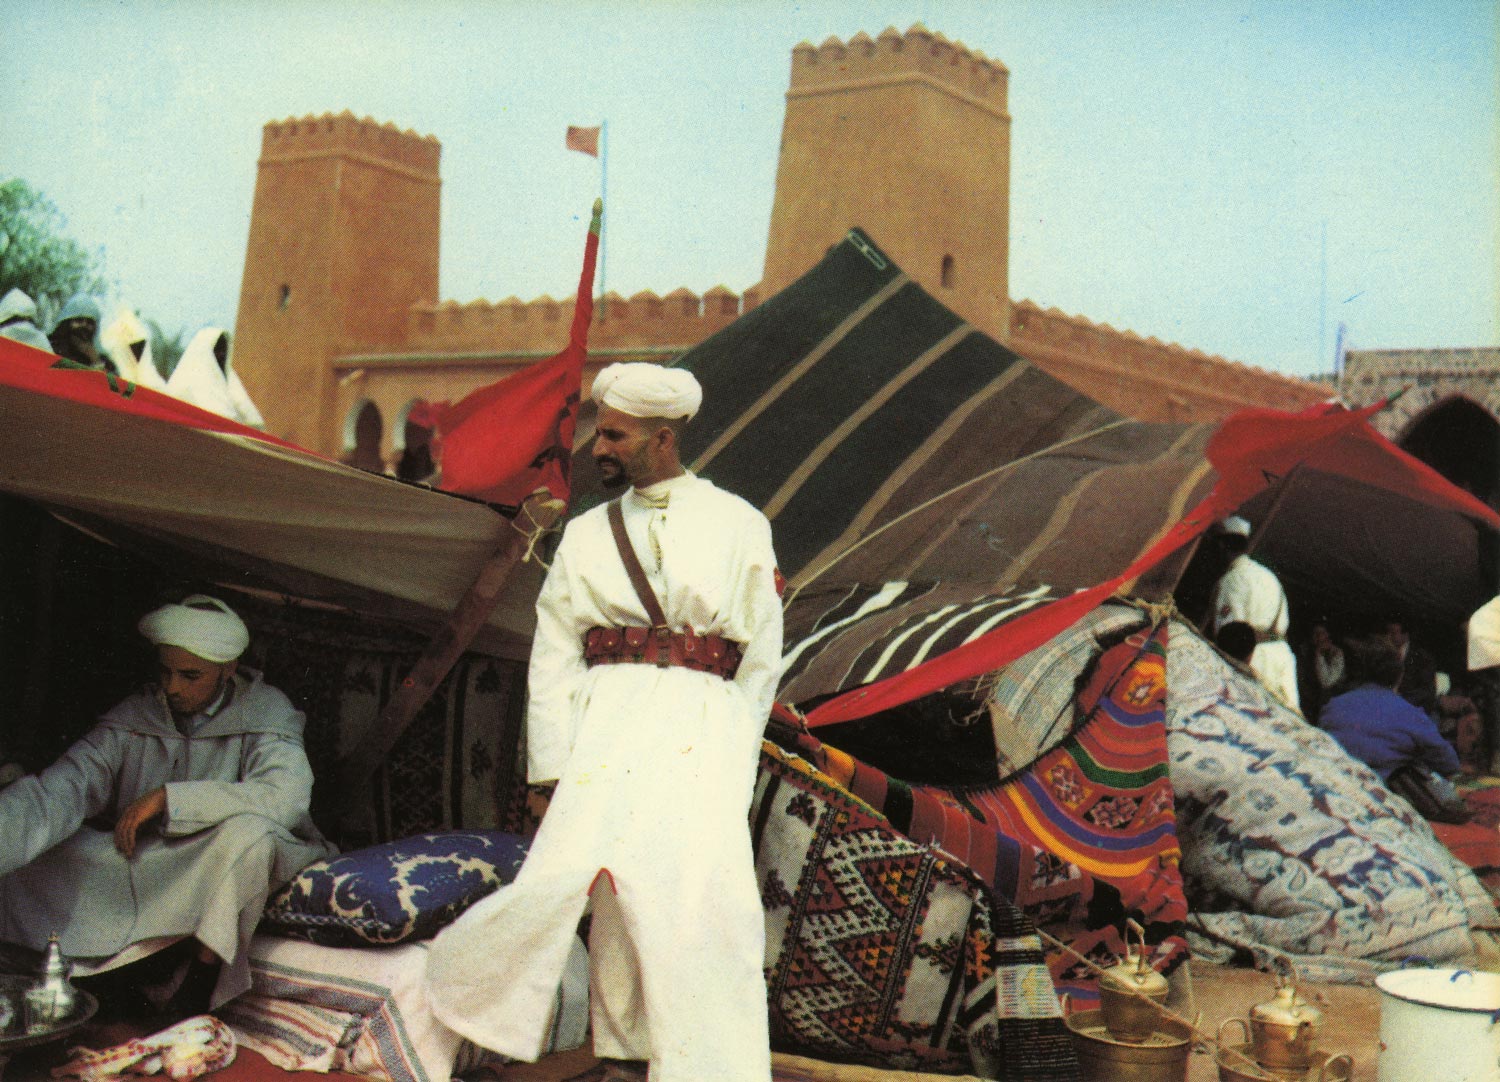  Sochepress - View of the ksar with performers in front of tent 